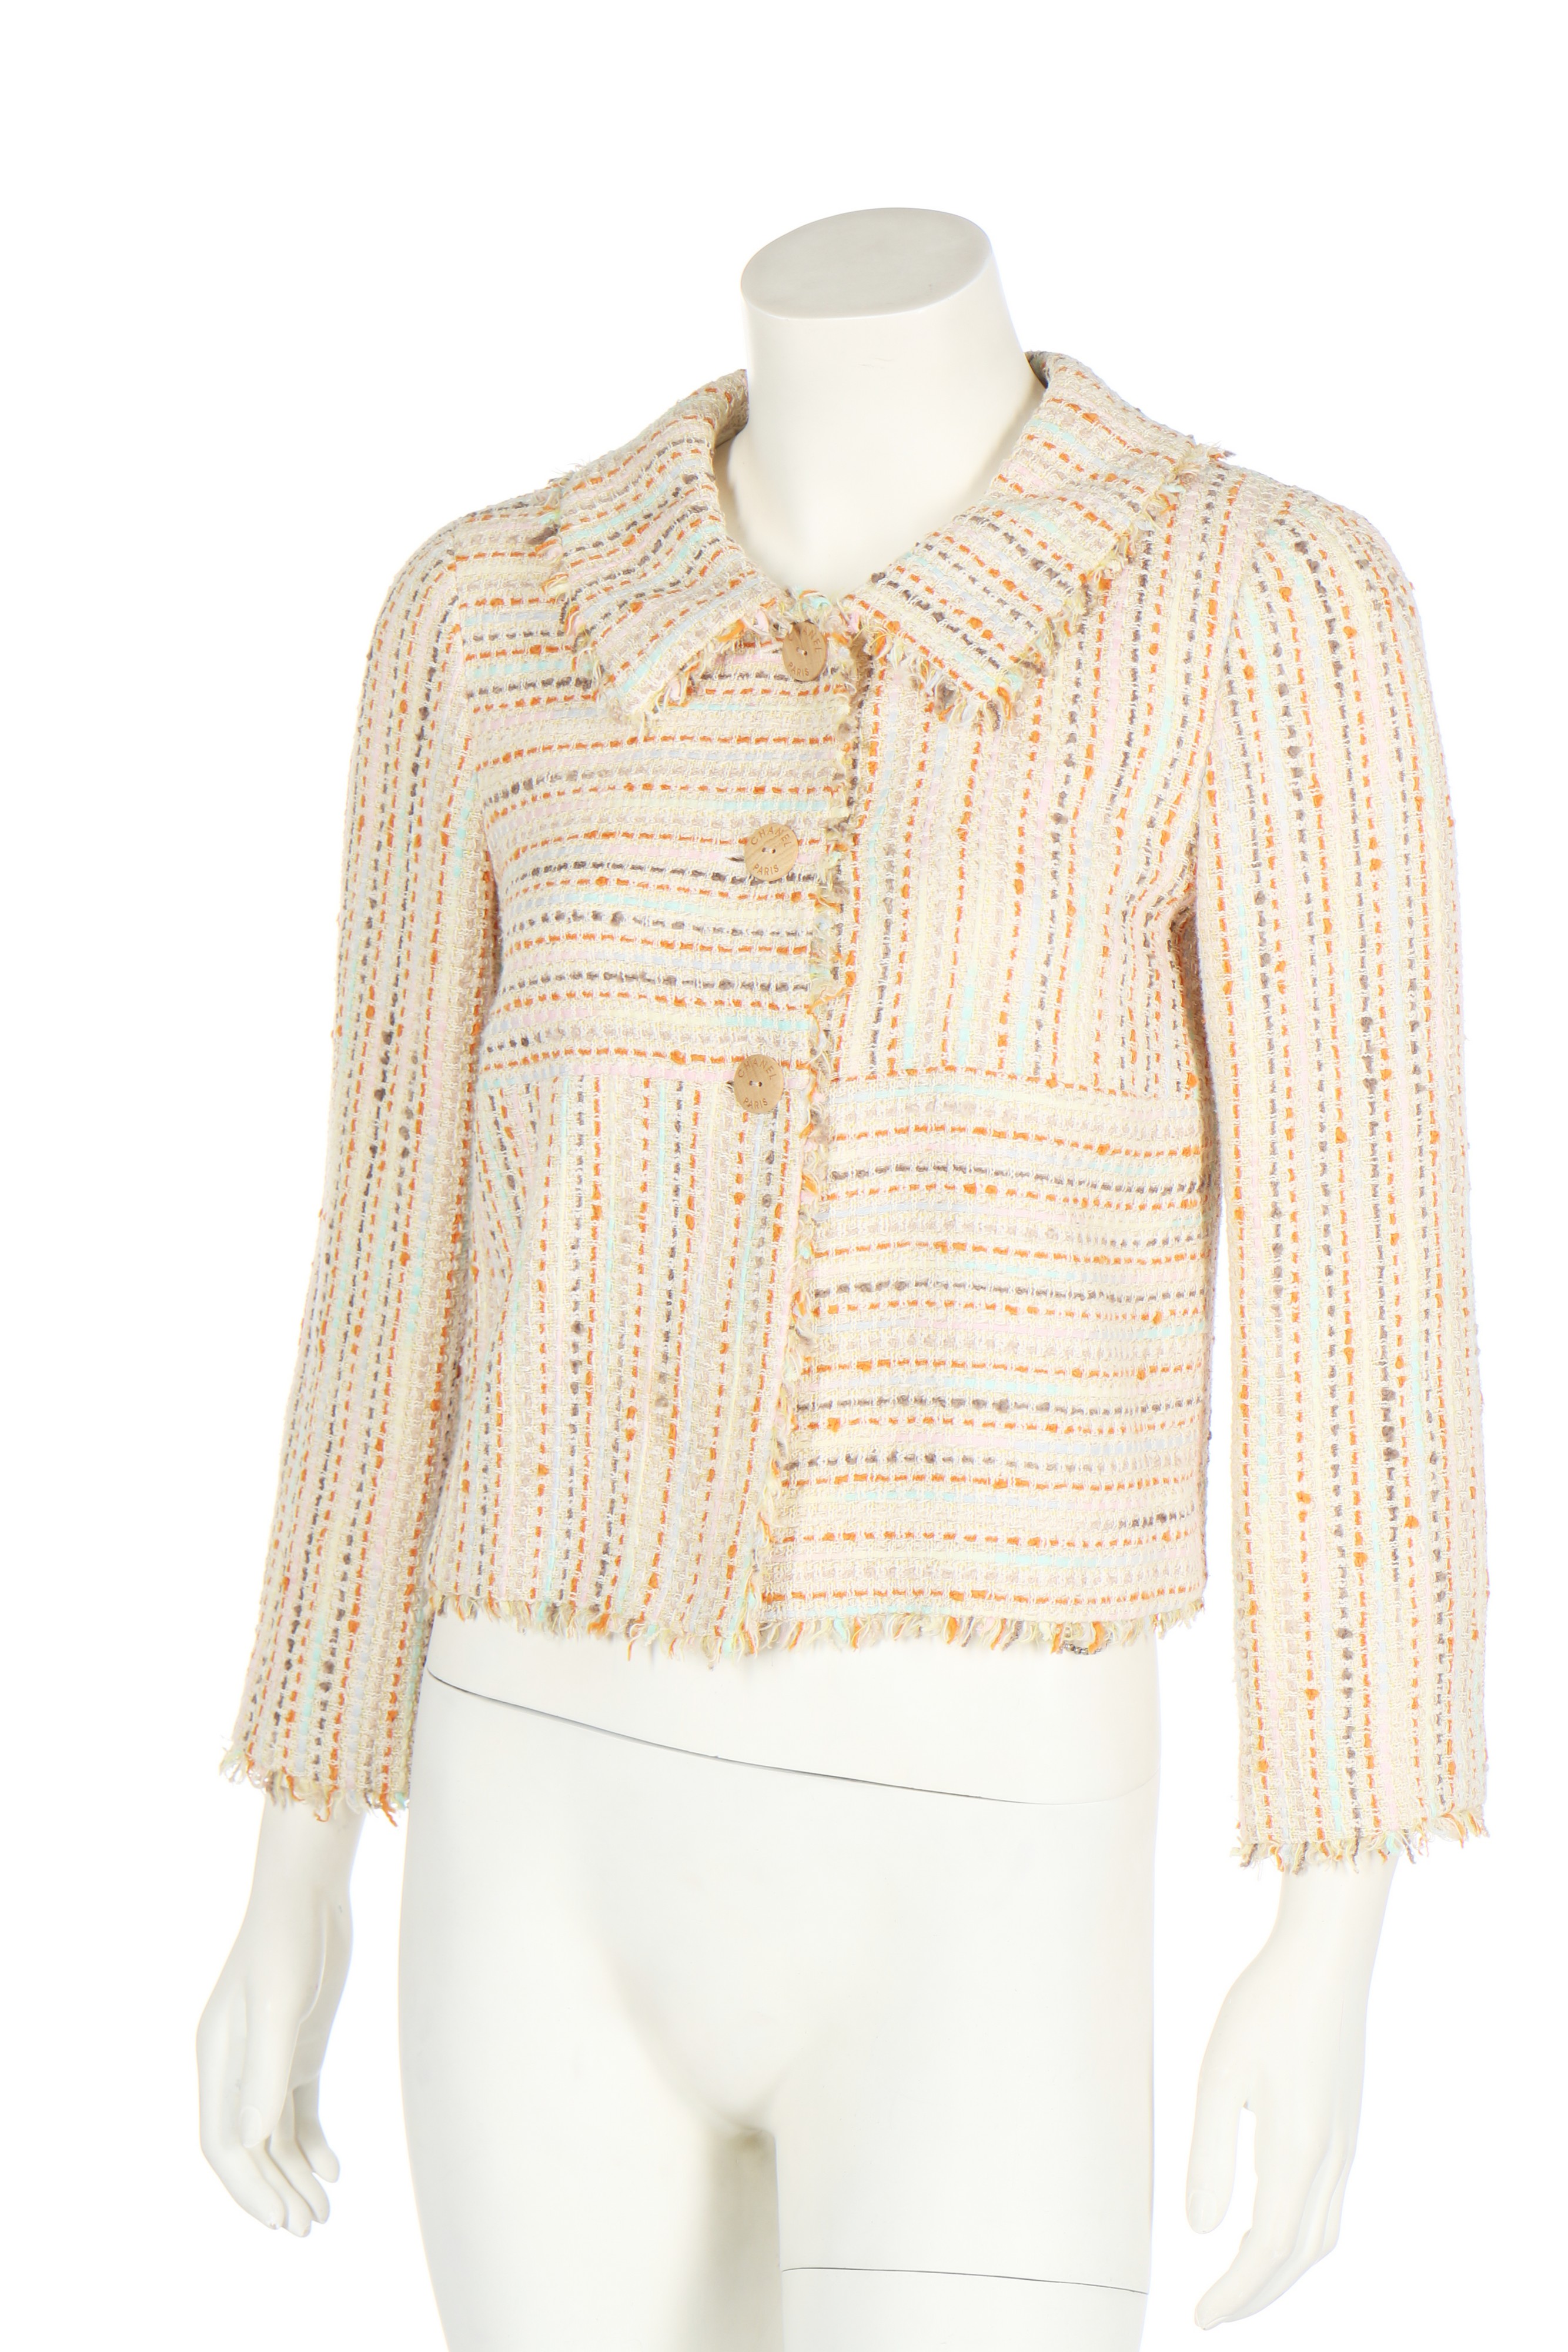 A Chanel cotton and wool tweed jacket, 2000-01 Cruise collection